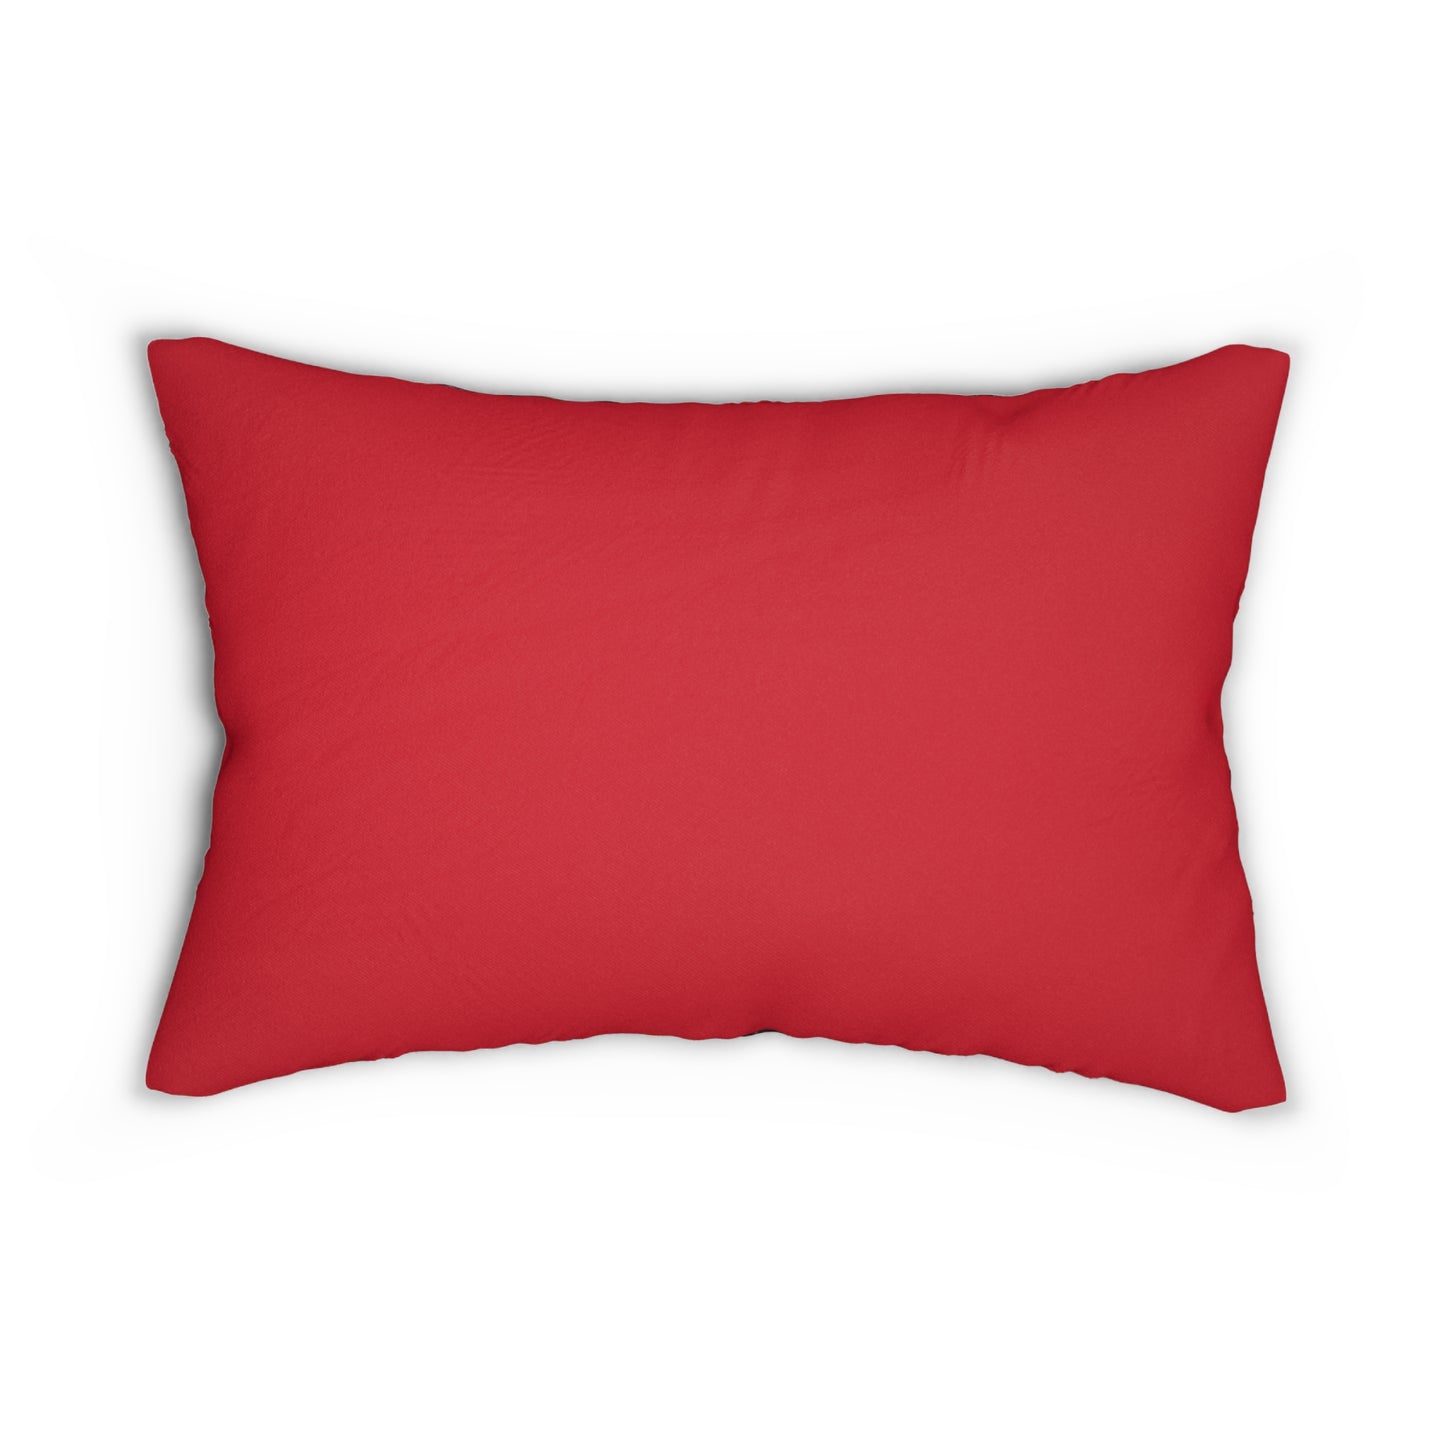 Black Santa Lumbar Pillow, Cool Cute Christmas Couch Holiday Pillow Cover